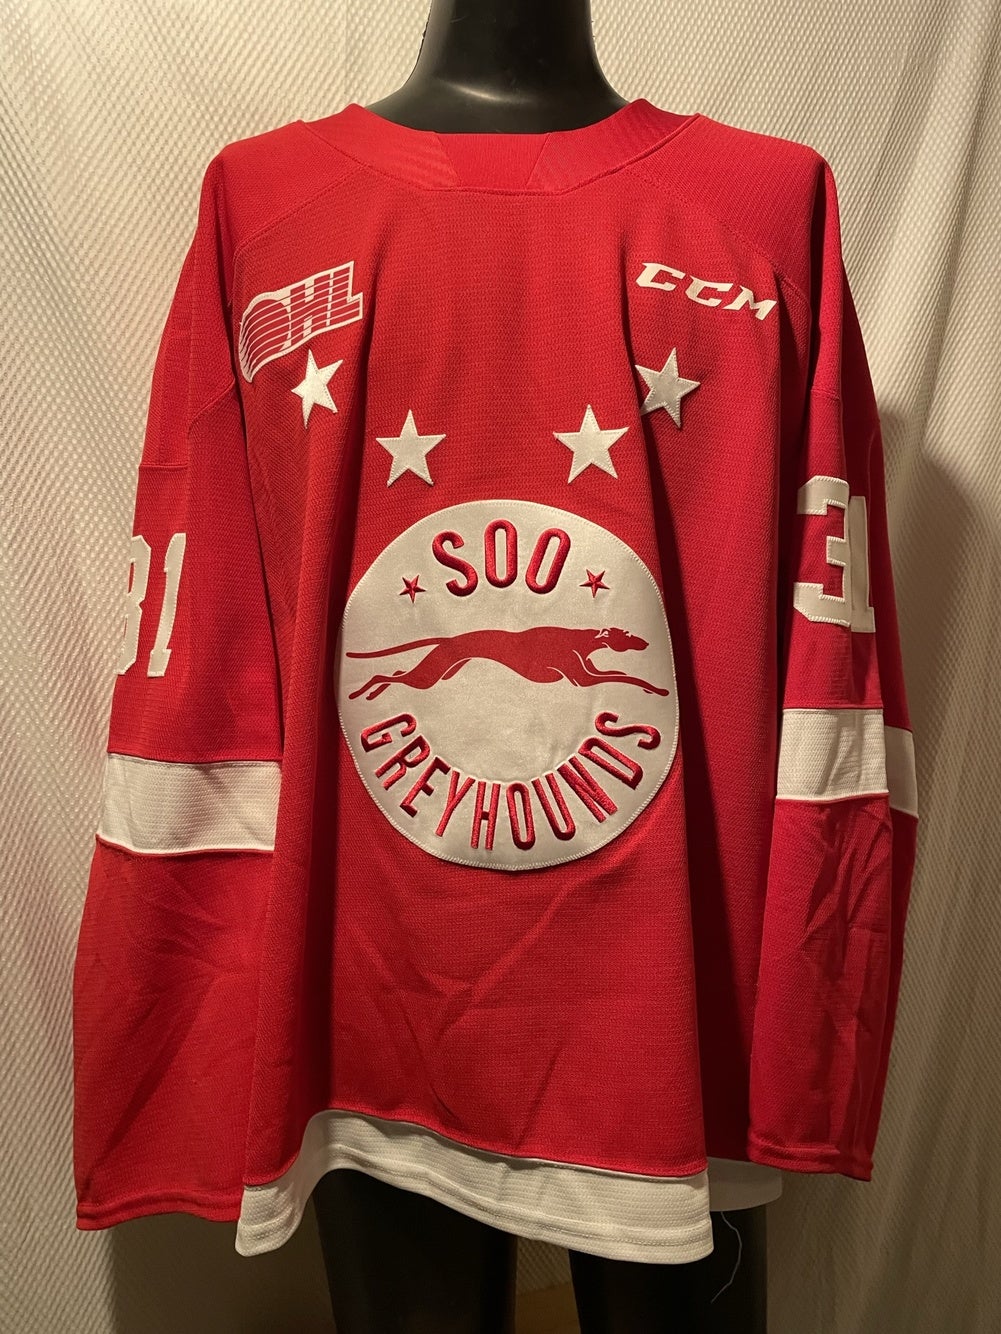 OHL] Soo Greyhounds 2018 Remembrance Day jersey being worn